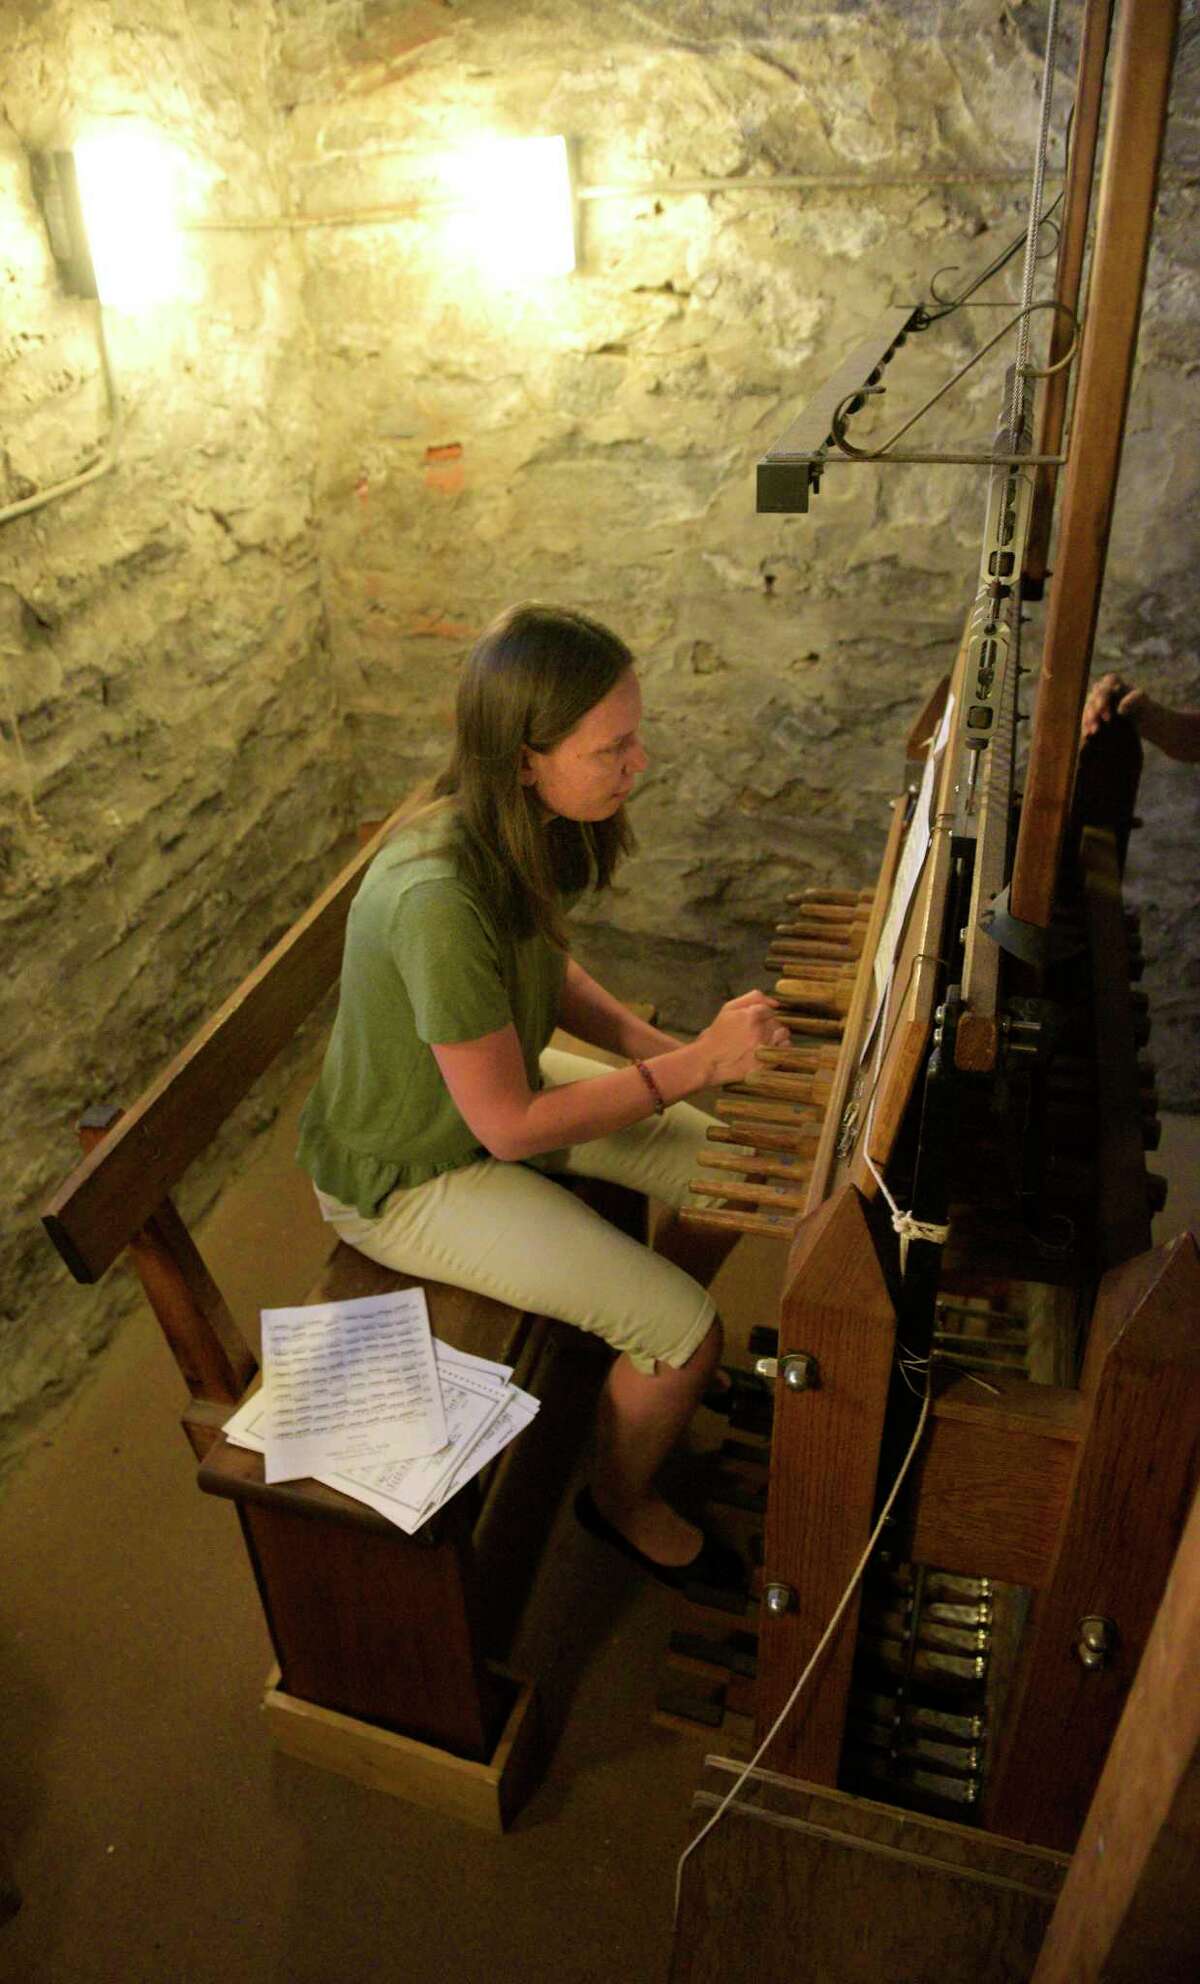 Tatiana Lukyanova practices on the bell tower carillon at St. James's Episcopal Church ahead of the church's first summer carillon concerts on Wednesday, June 29, 2022. Lukyanova, from New Britain, is organist and accompanist at South United Methodist Church, Manchester, carillonneur at the First Church of Christ Congregational in New Britain and carillonneur in residence at Storrs Congregational Church.  Danbury, Conn.